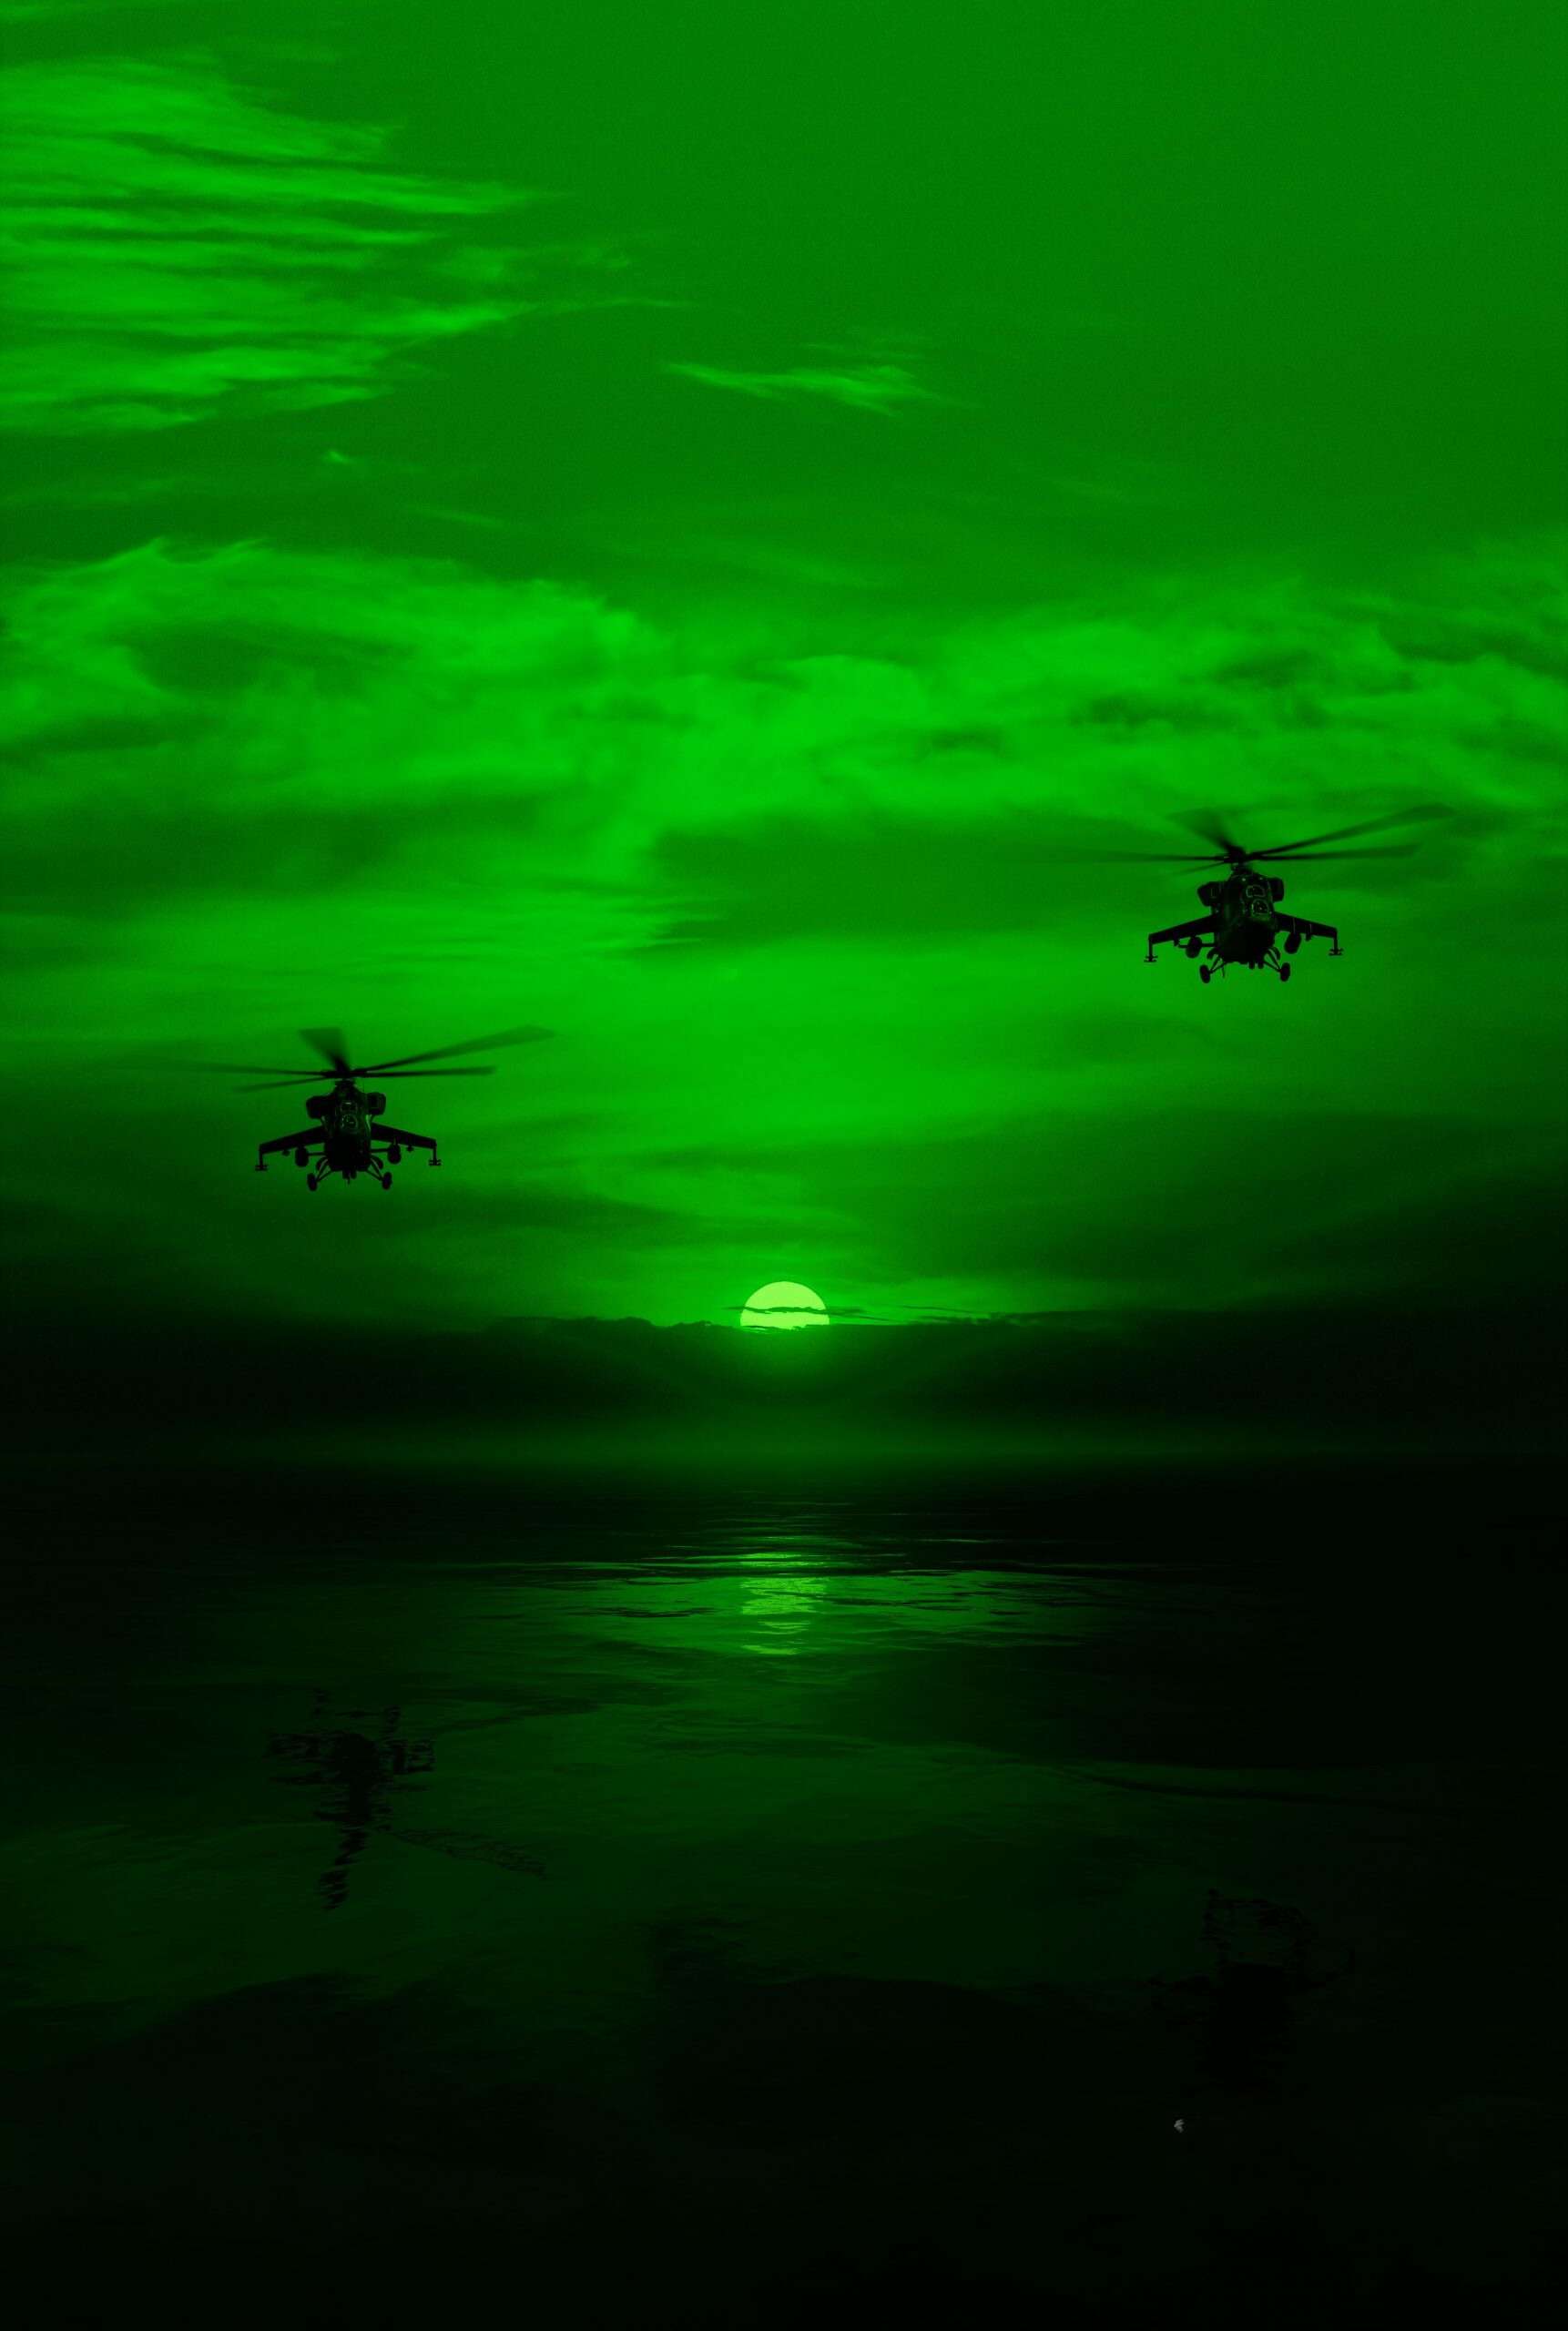 night vision view of helicopter